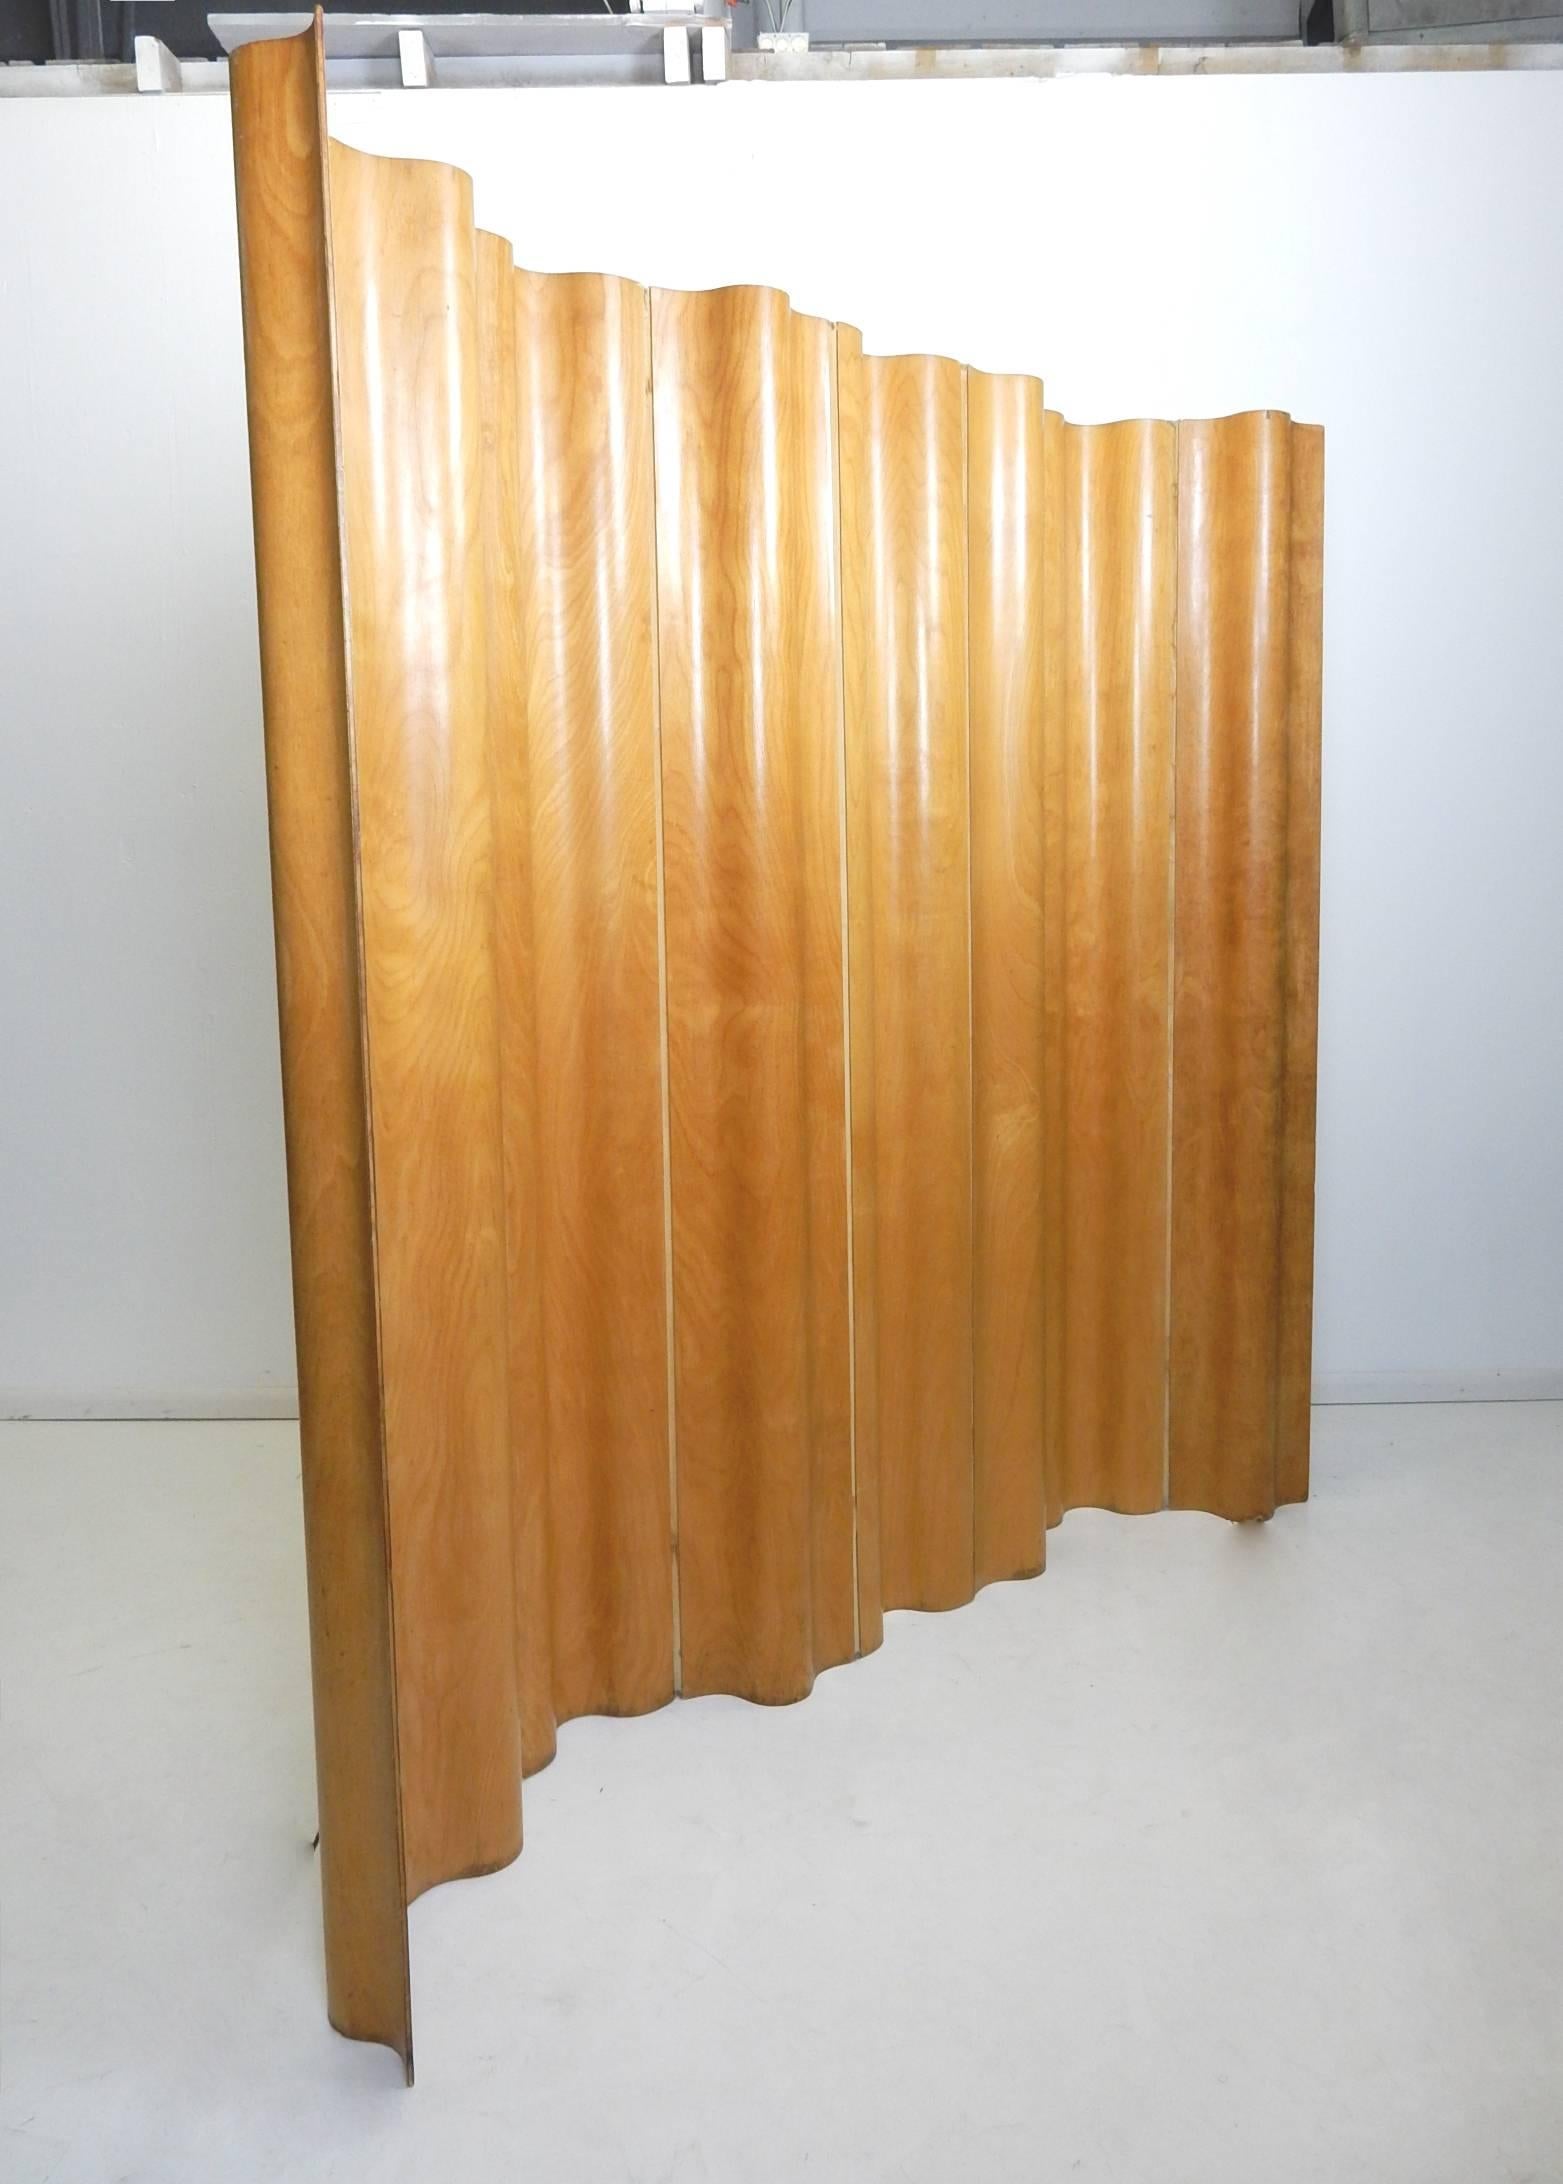 Rare, early original tall molded birch plywood folding room divider screen designed by Charles and Ray Eames.
Eight panels with woven canvas between. Perfect for creating privacy or layered space.
Shows some age however perfect for use as intended.